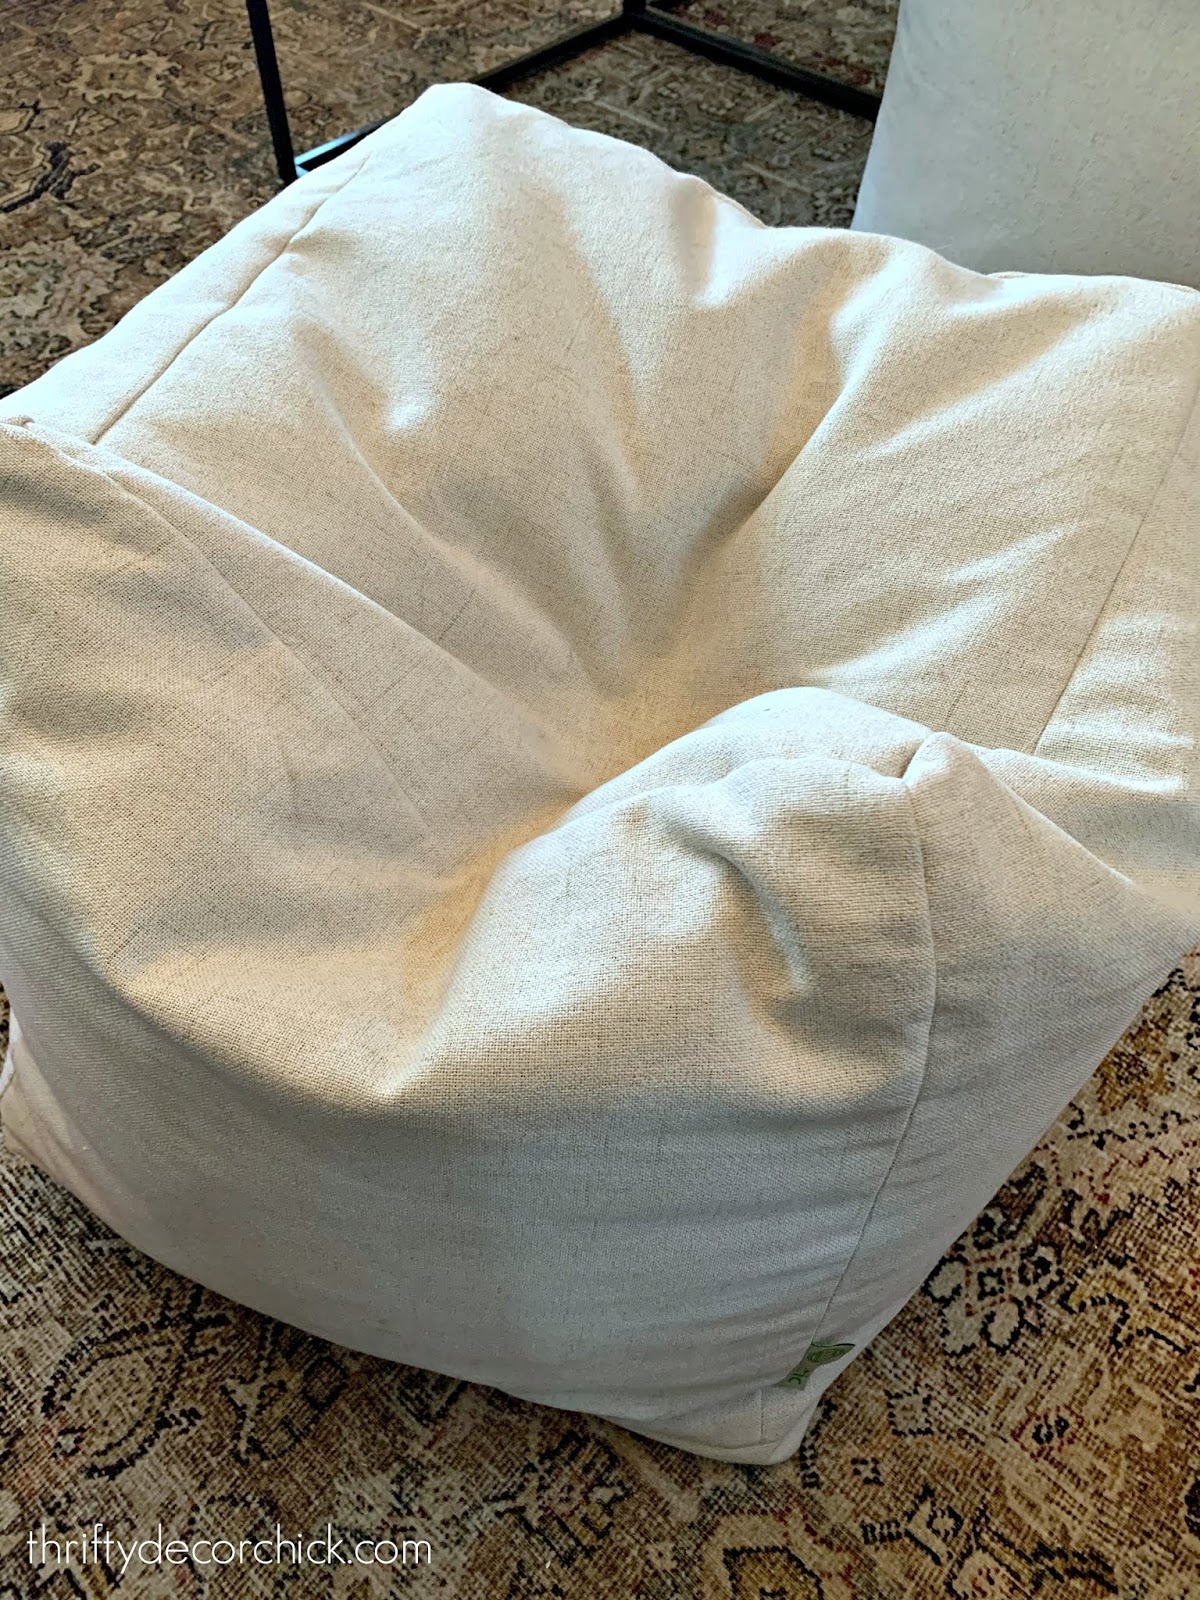 How to Easily Refluff a Pouf or Ottoman, Thrifty Decor Chick